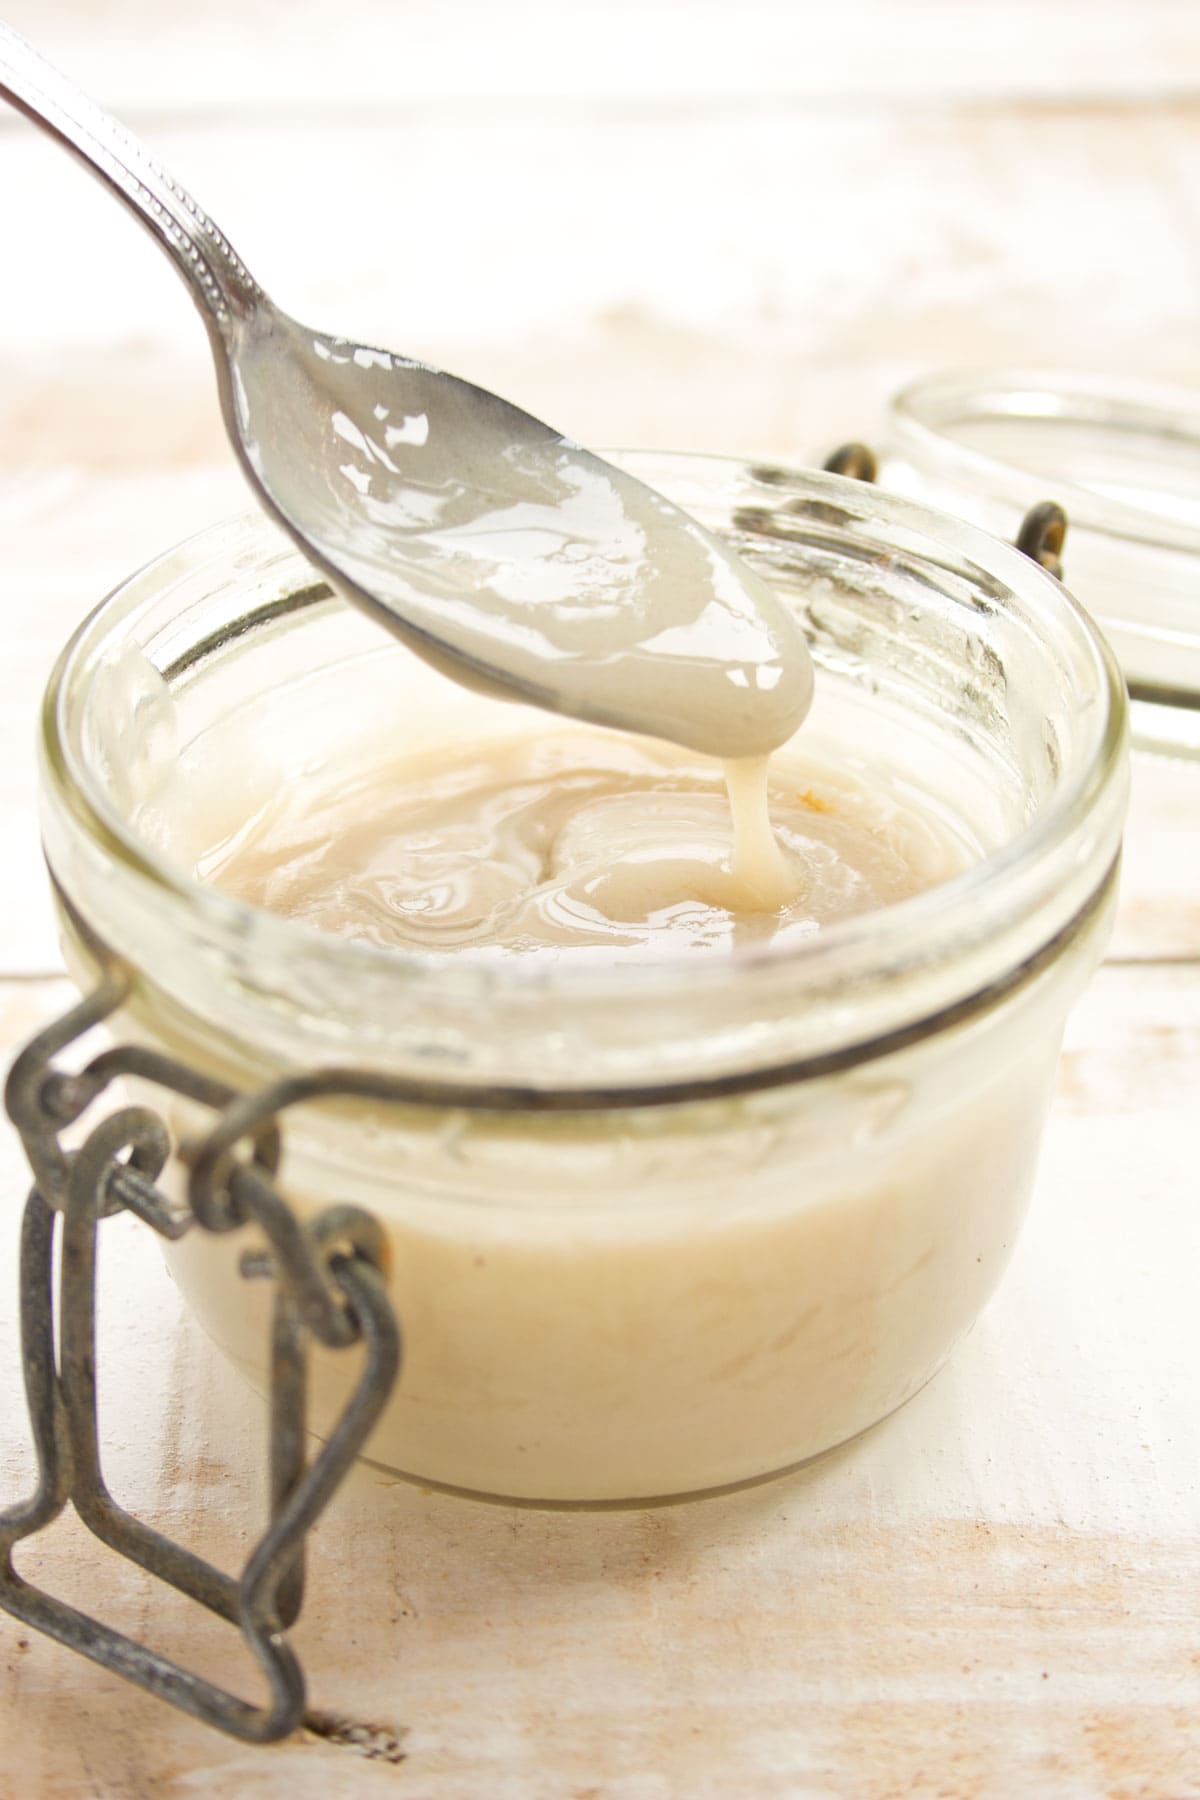 A glass jar with homemade condensed milk and a spoon.